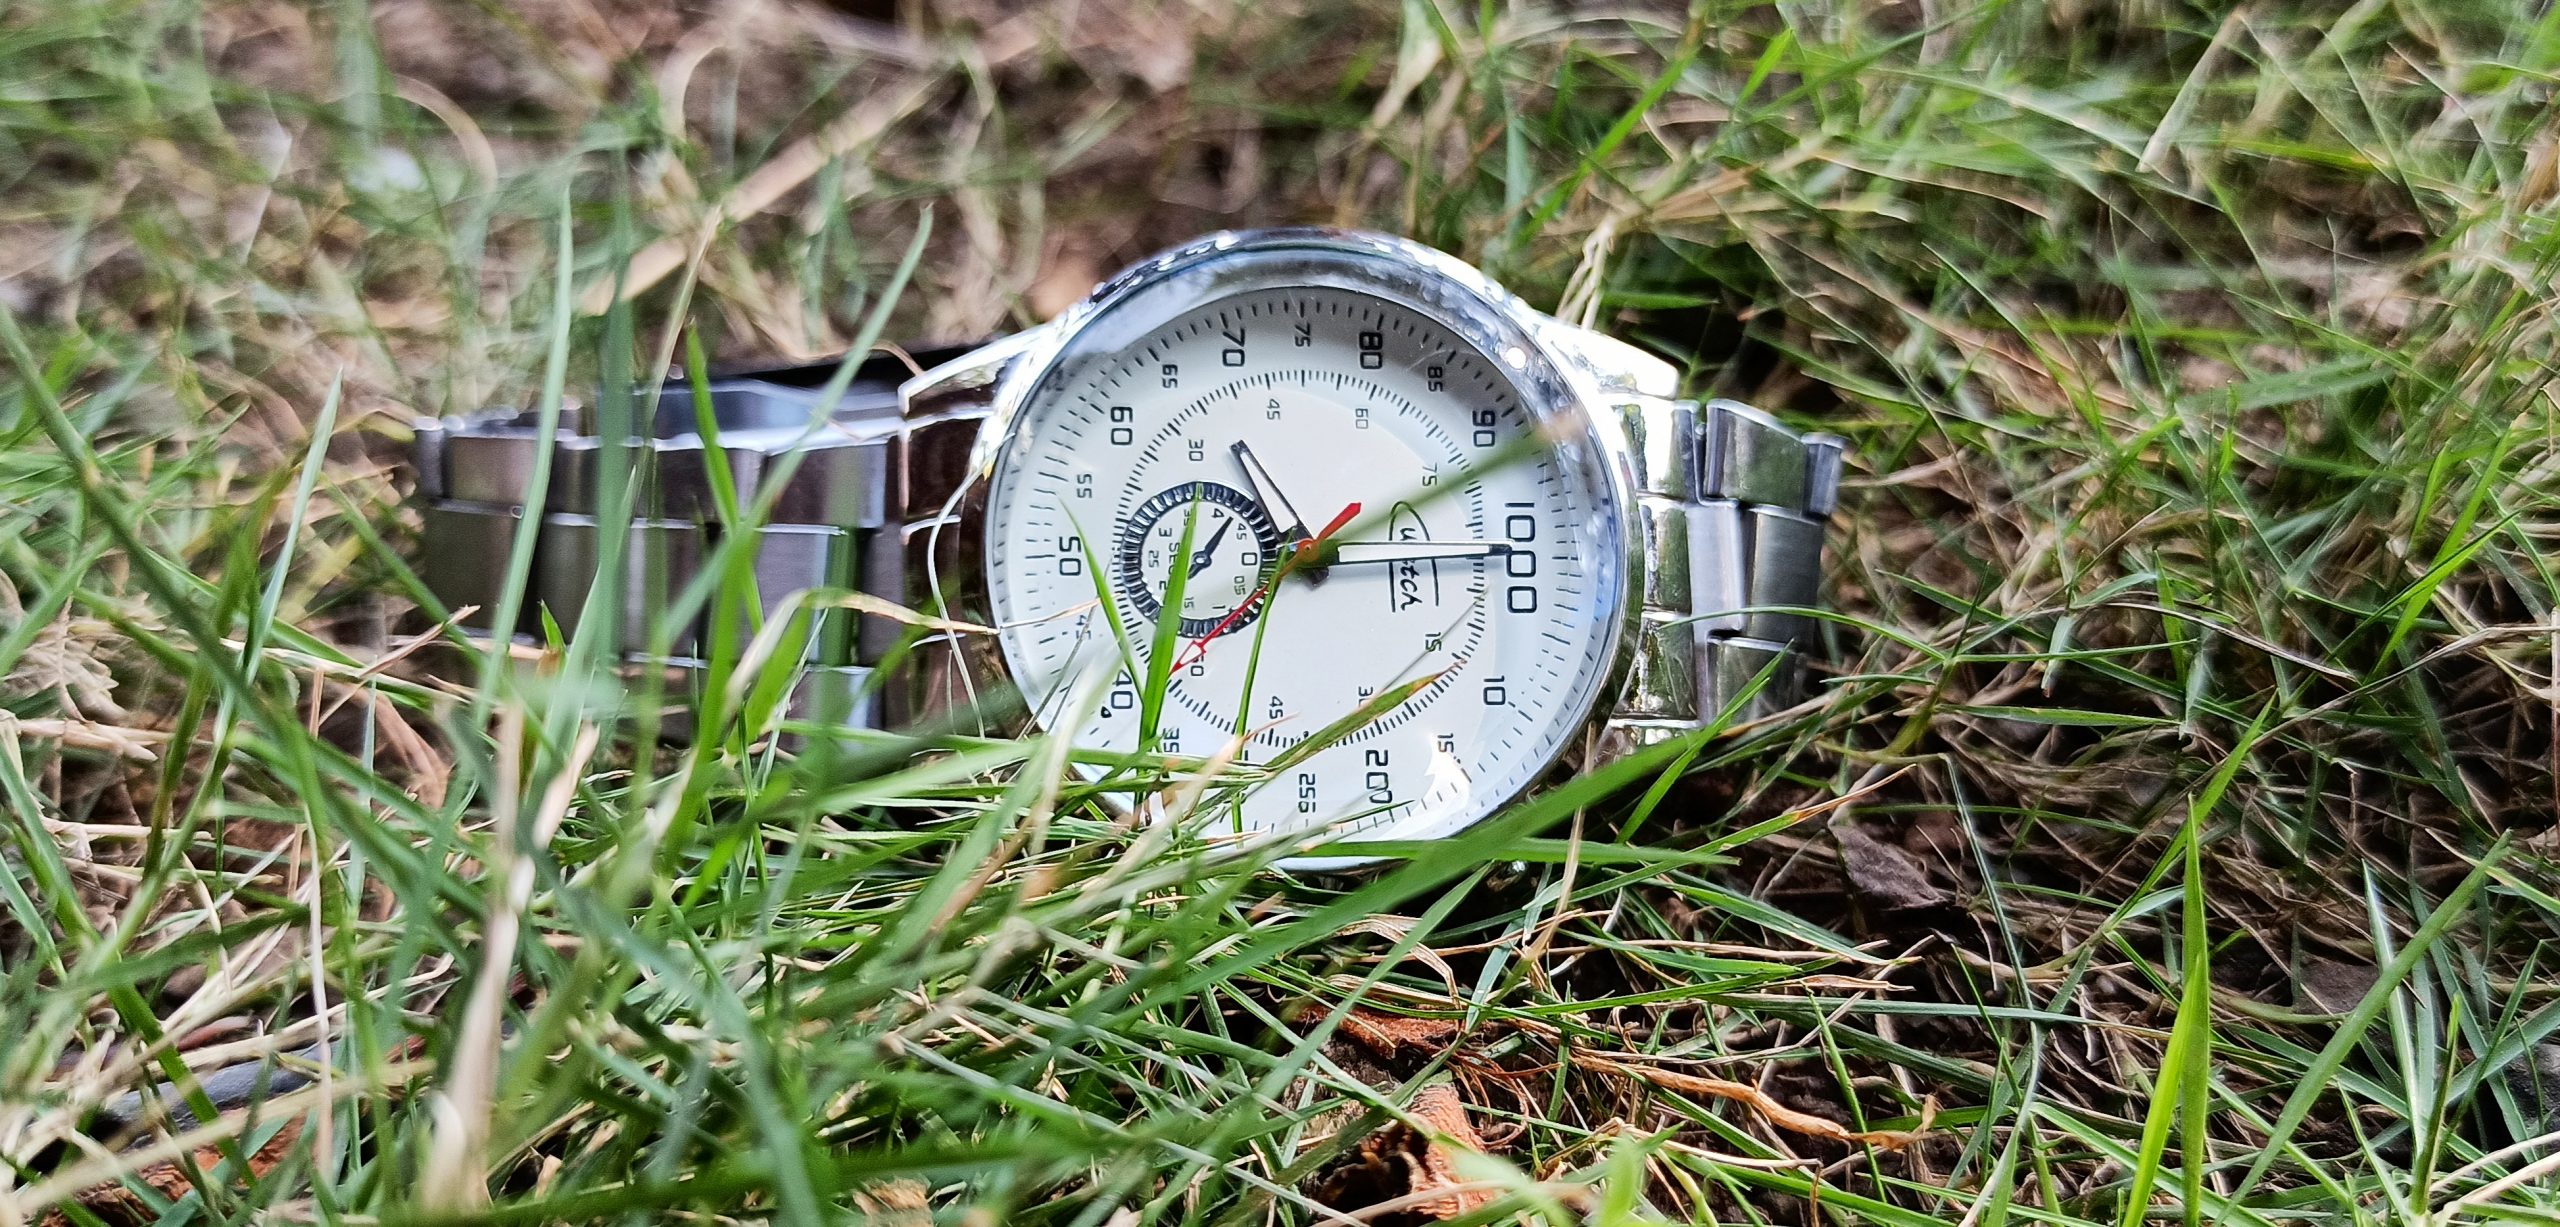 Watch in the grass